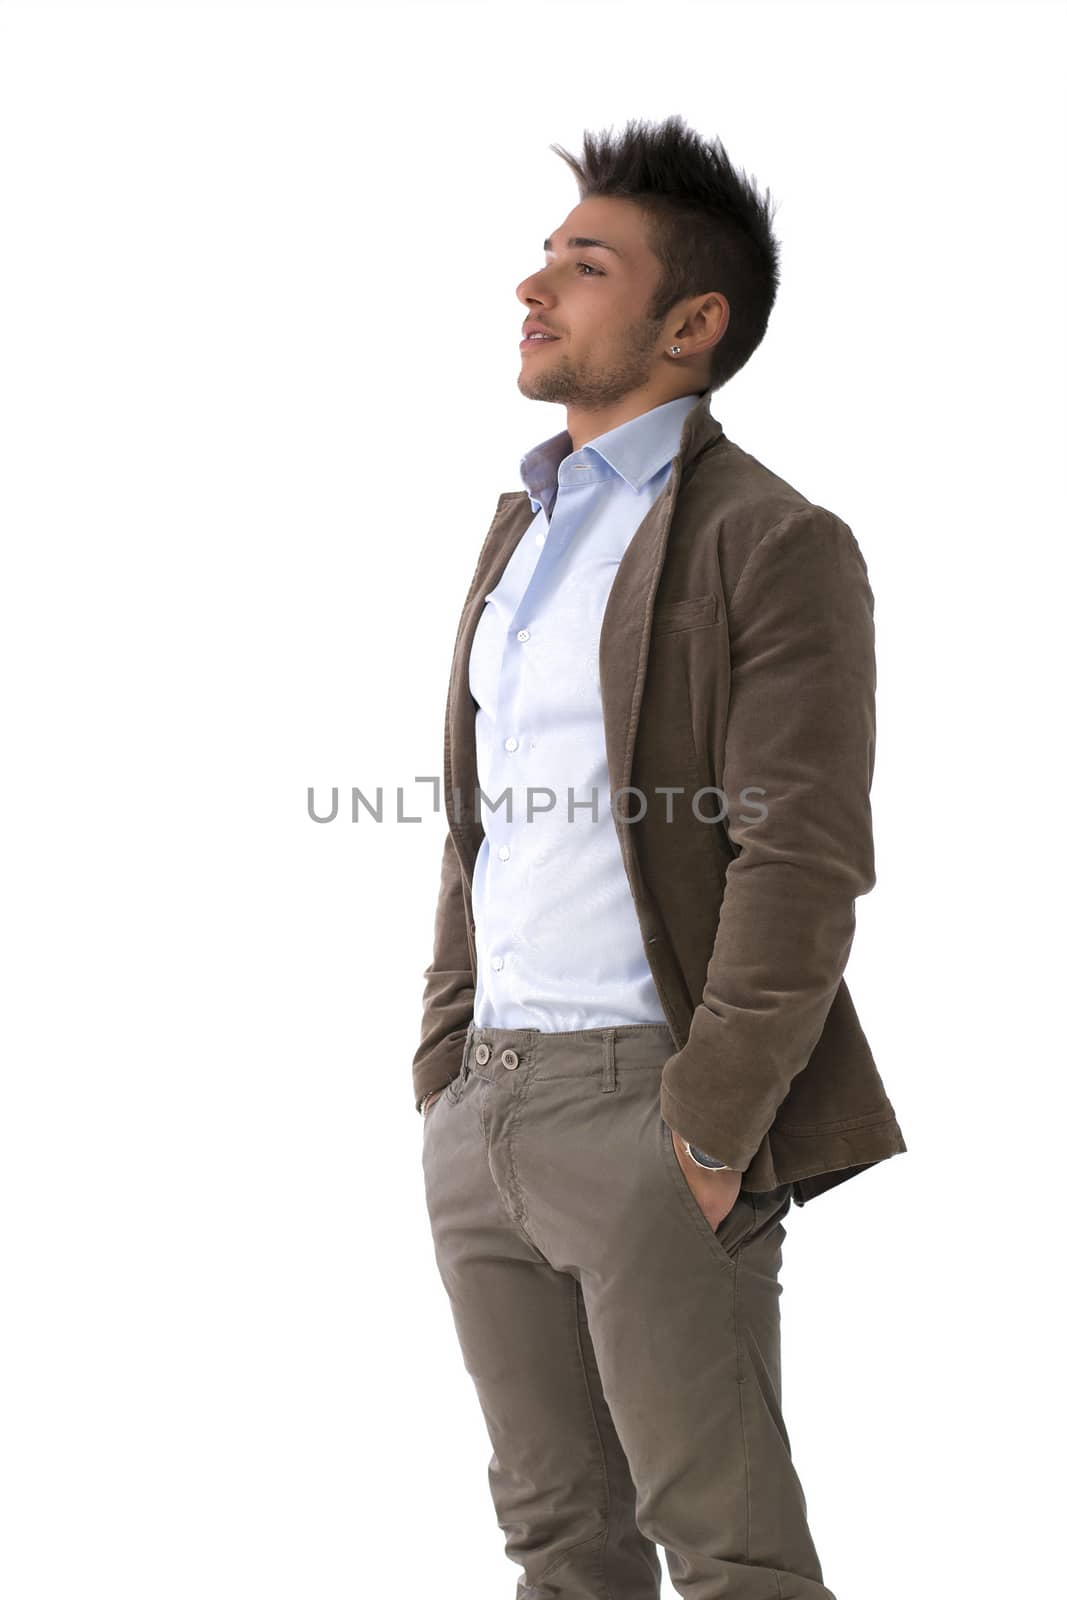 Handsome young man portrait, standing isolated on white, profile position